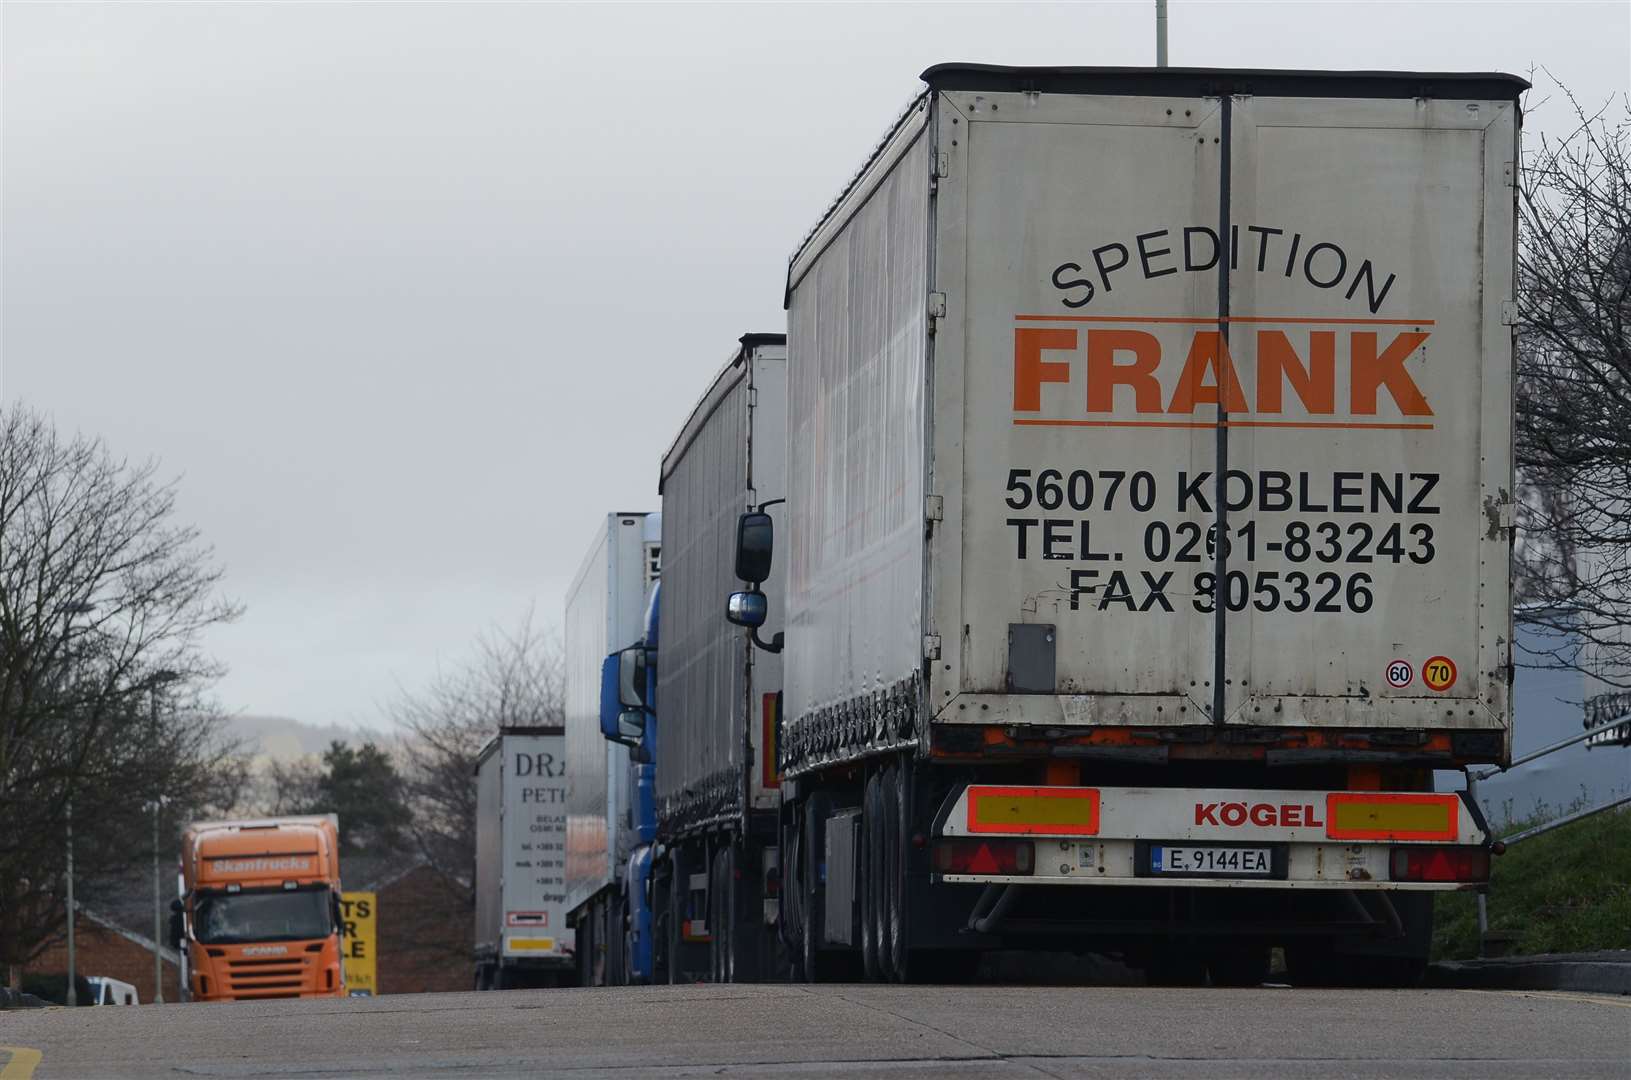 Up to 2,000 lorries could be held on the site